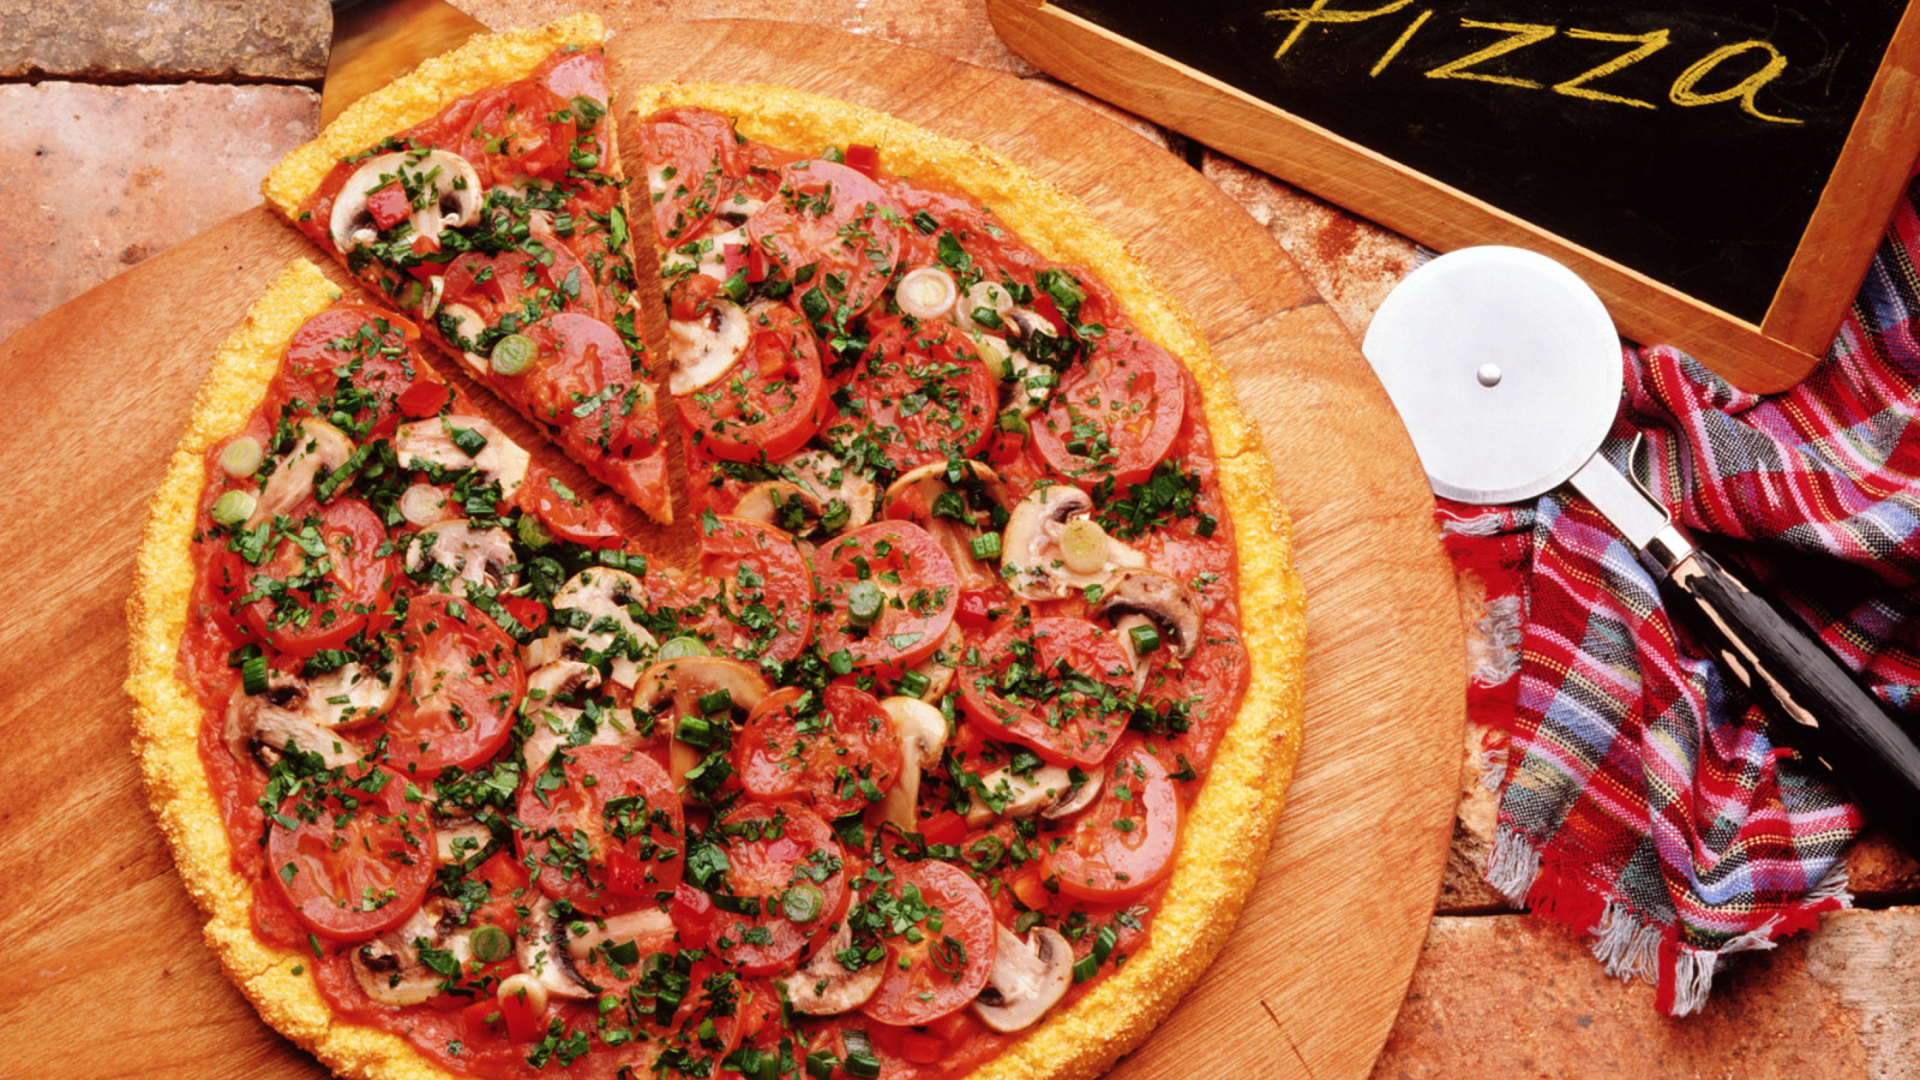 Pizza With Tomatoes And Mushrooms wallpaper 1920x1080